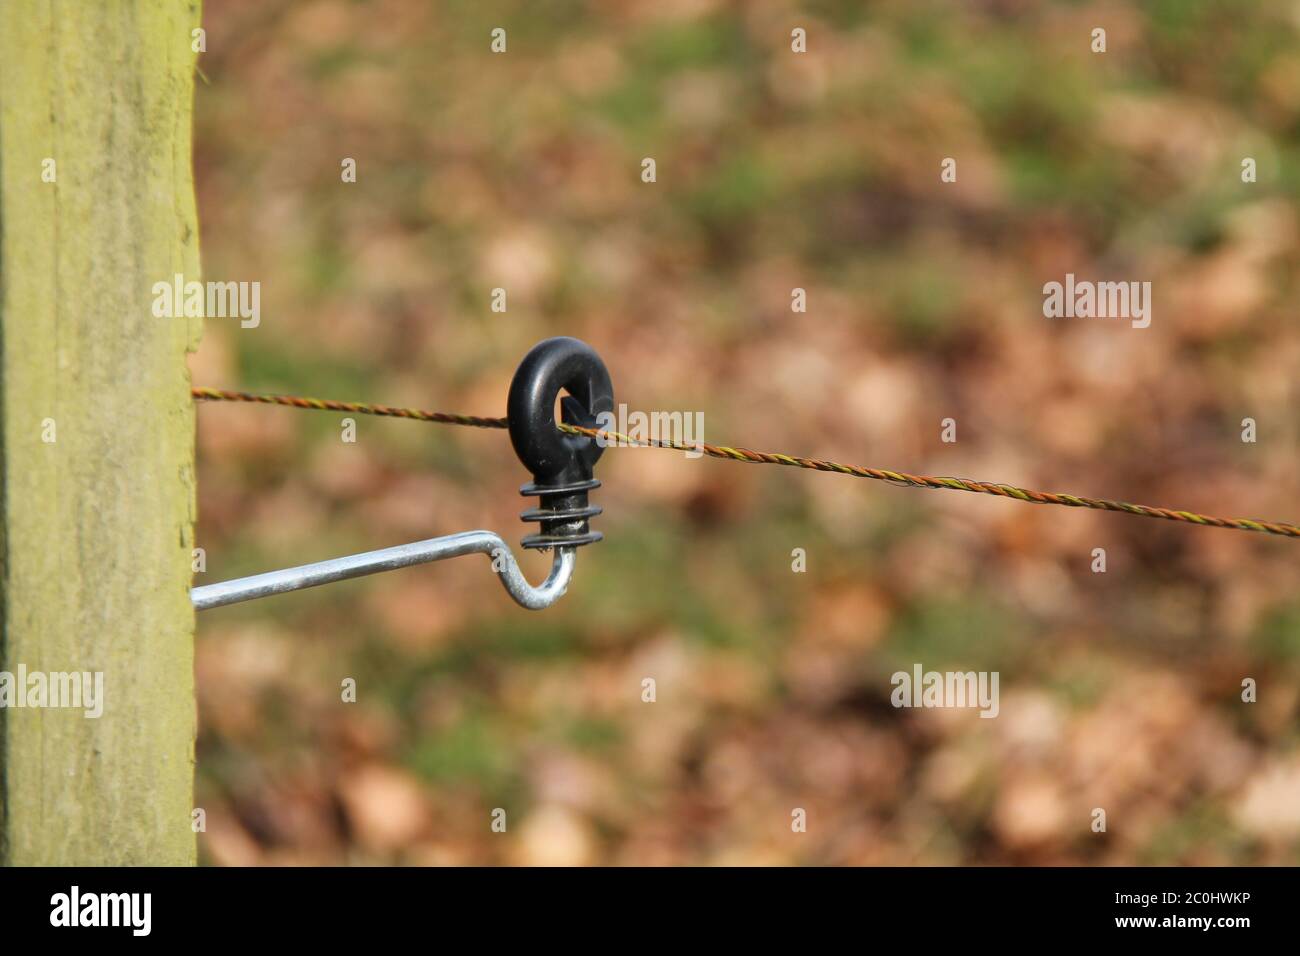 The Insulated Holder of an Electrified Fence Wire. Stock Photo